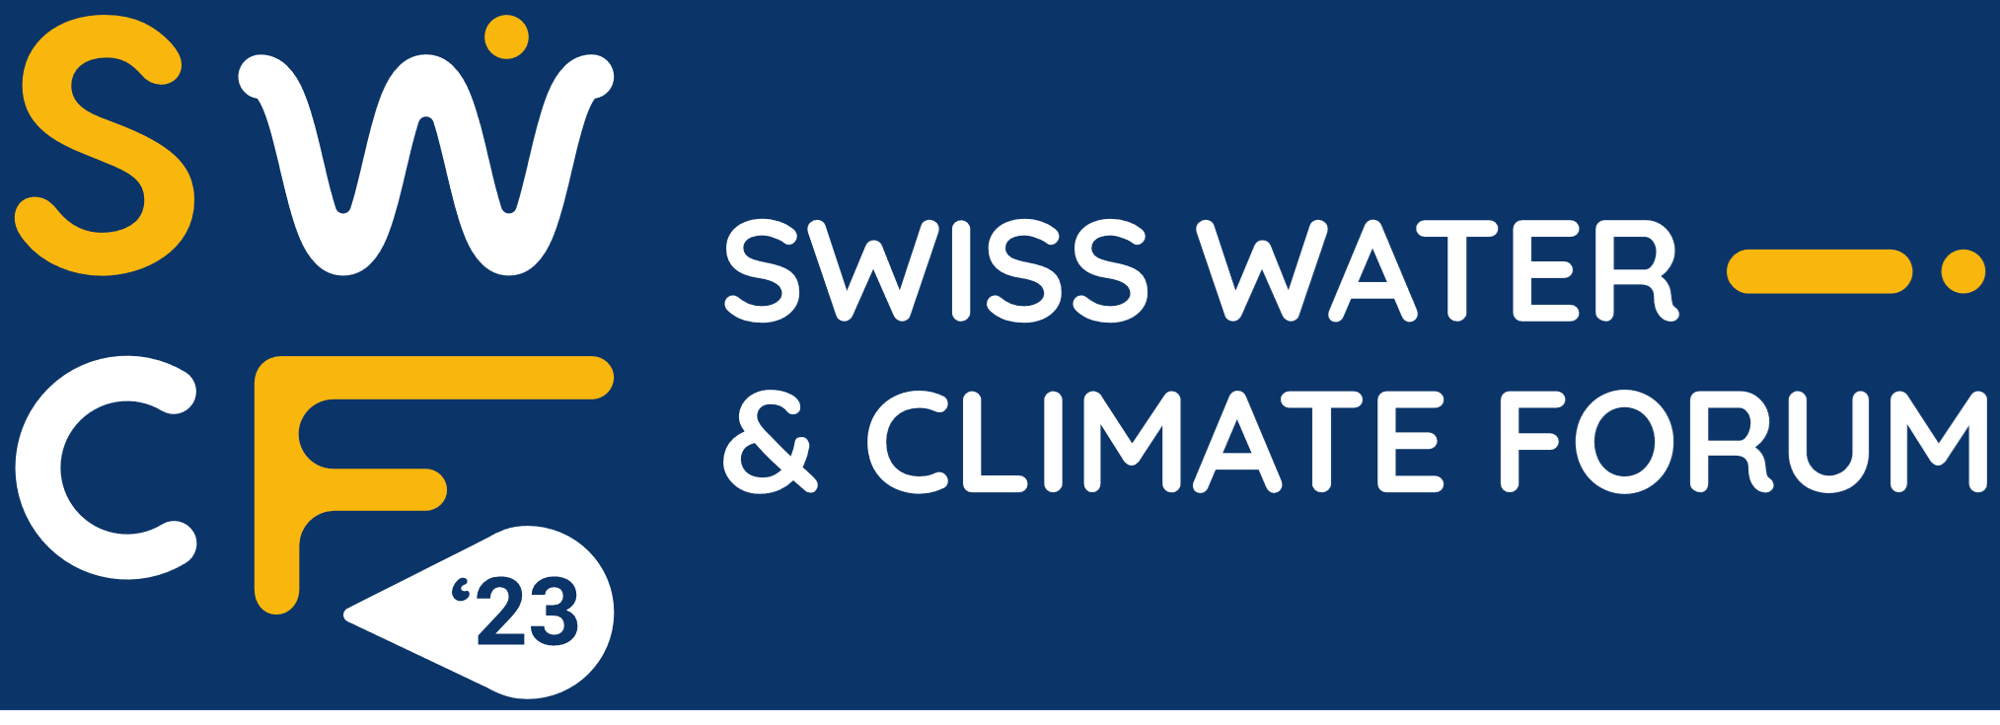 Swiss Water Climate Forum